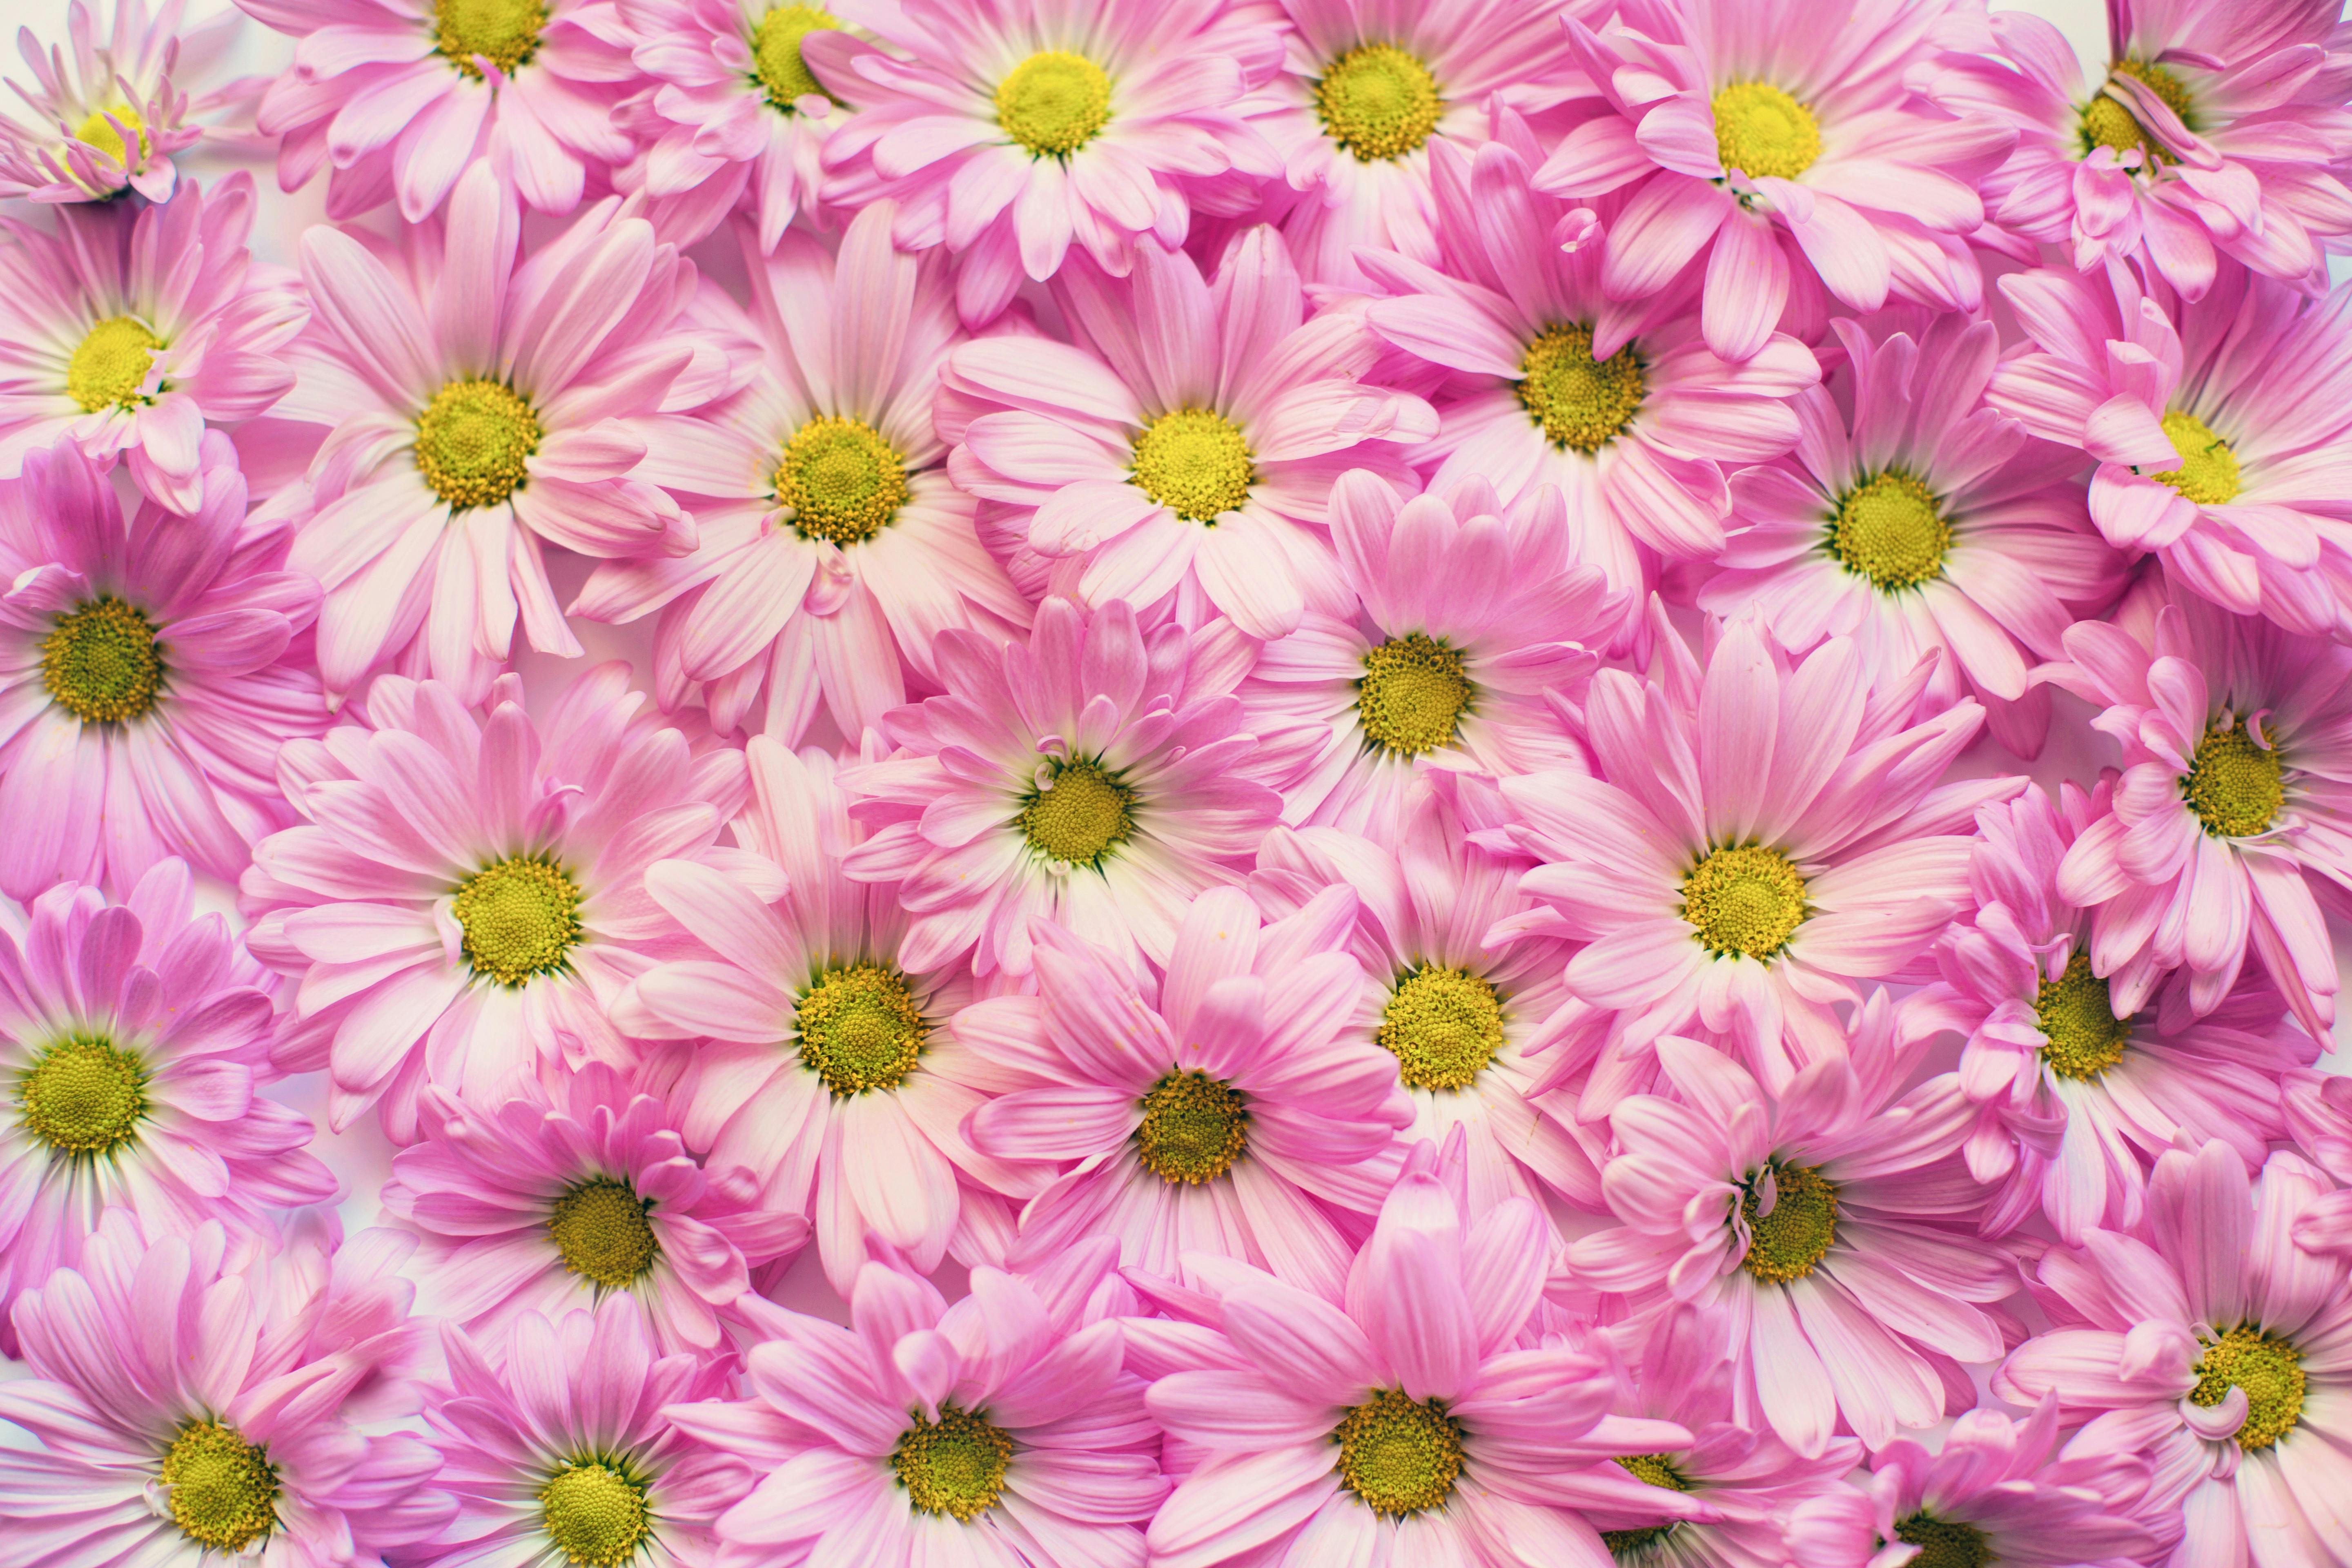 flower background images for photoshop